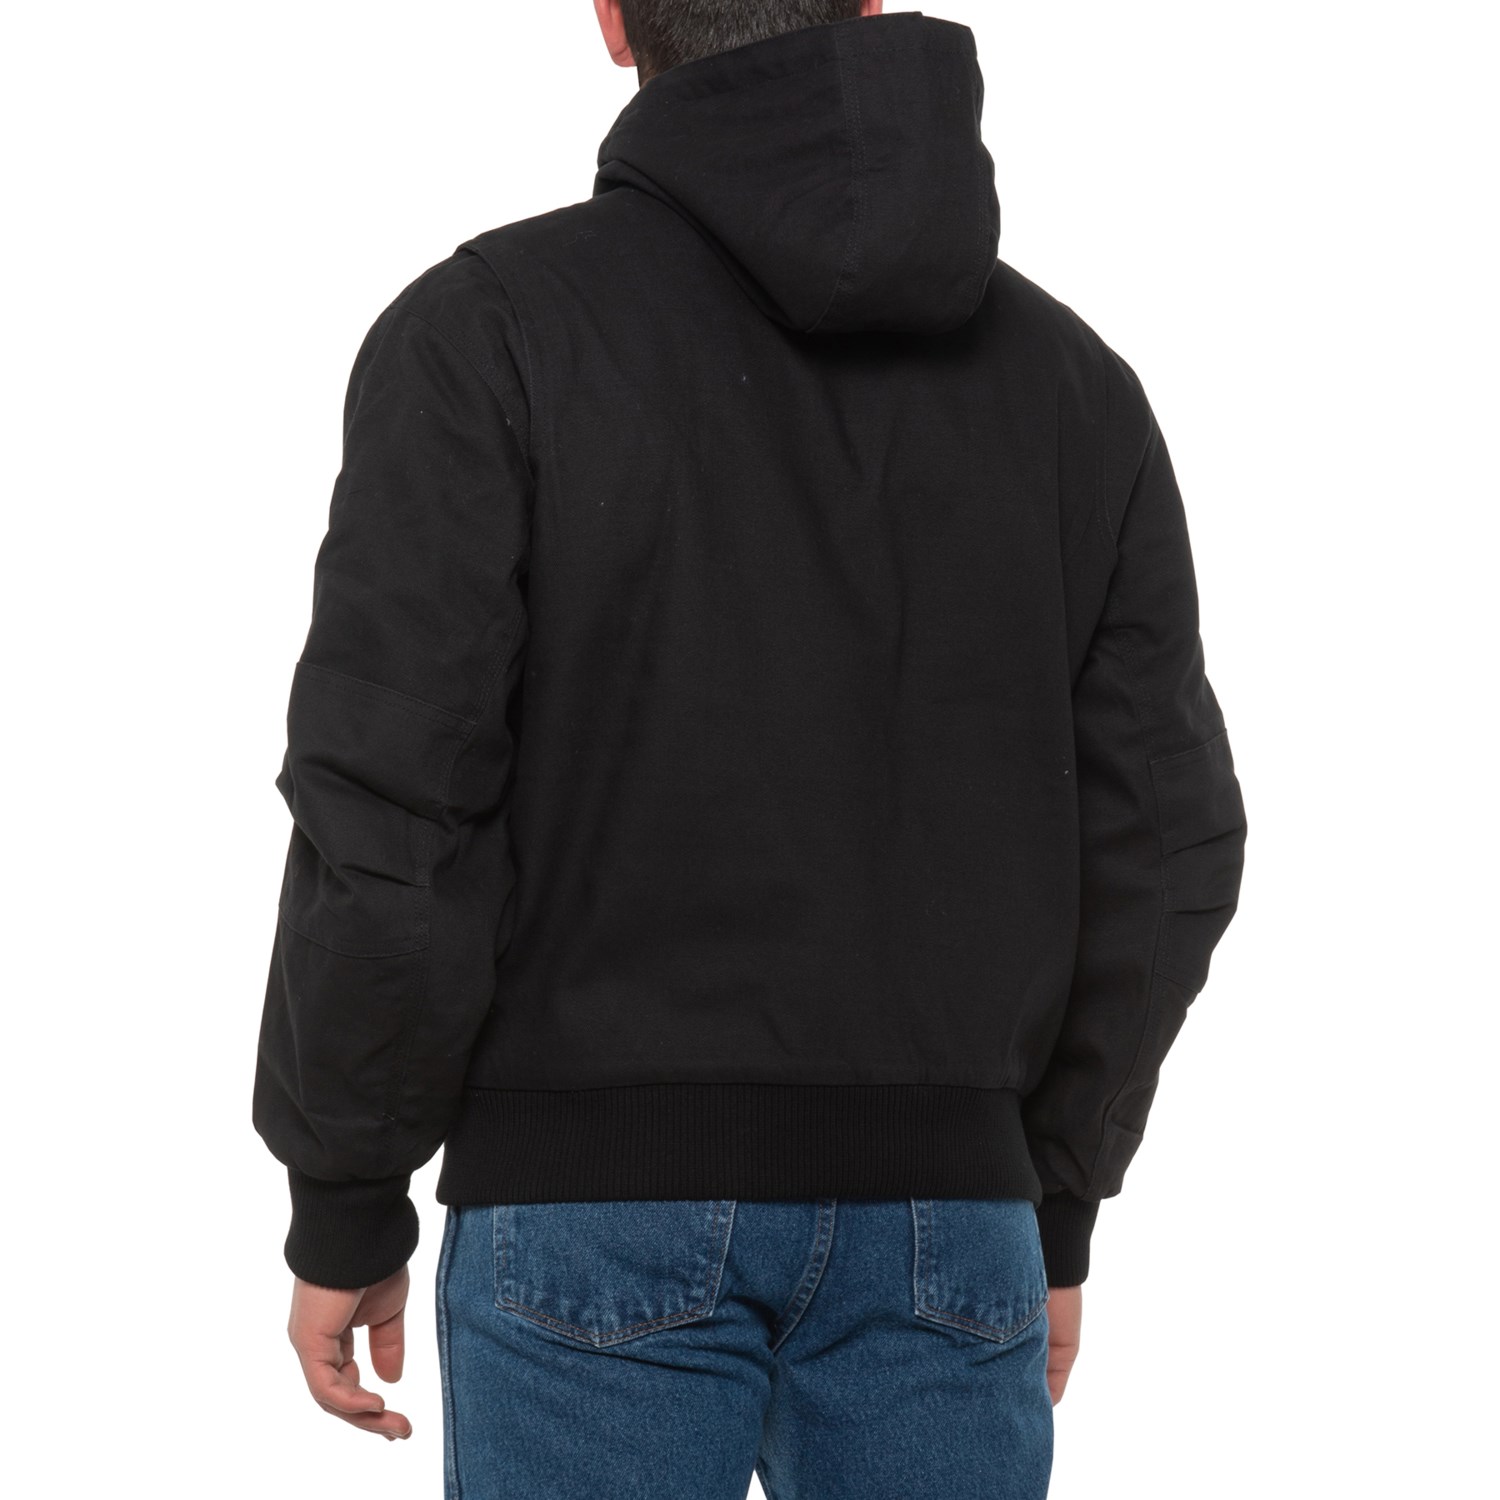 Walls Zero Zone Muscle Back Duck Jacket (For Men) - Save 66%